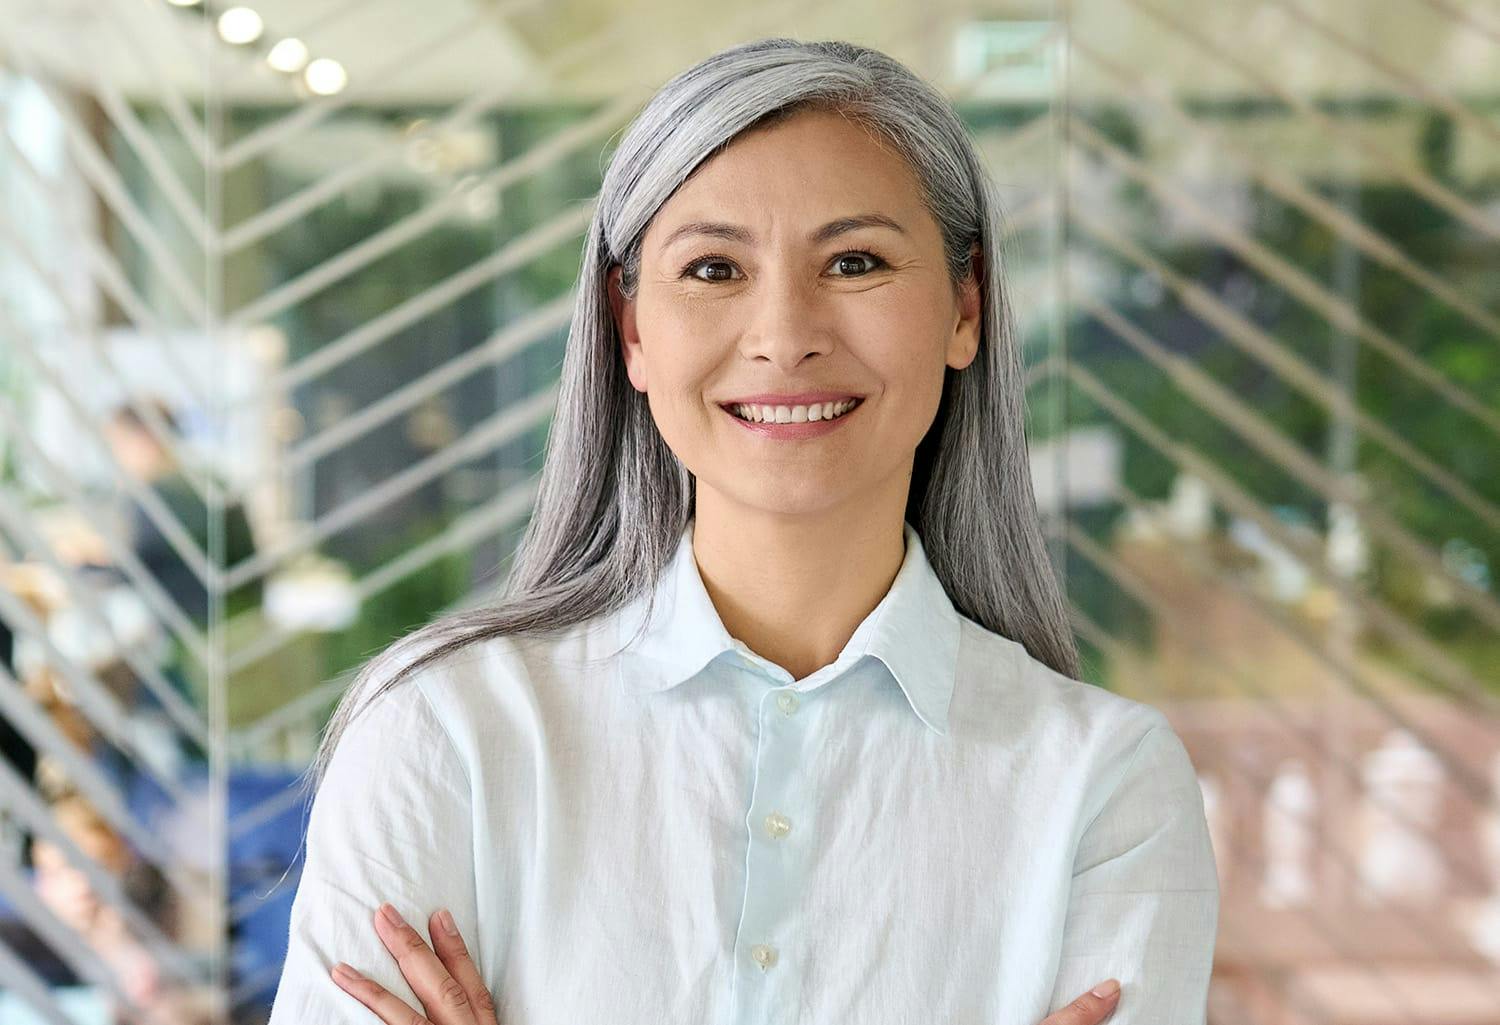 Woman in a white shirt, smiling